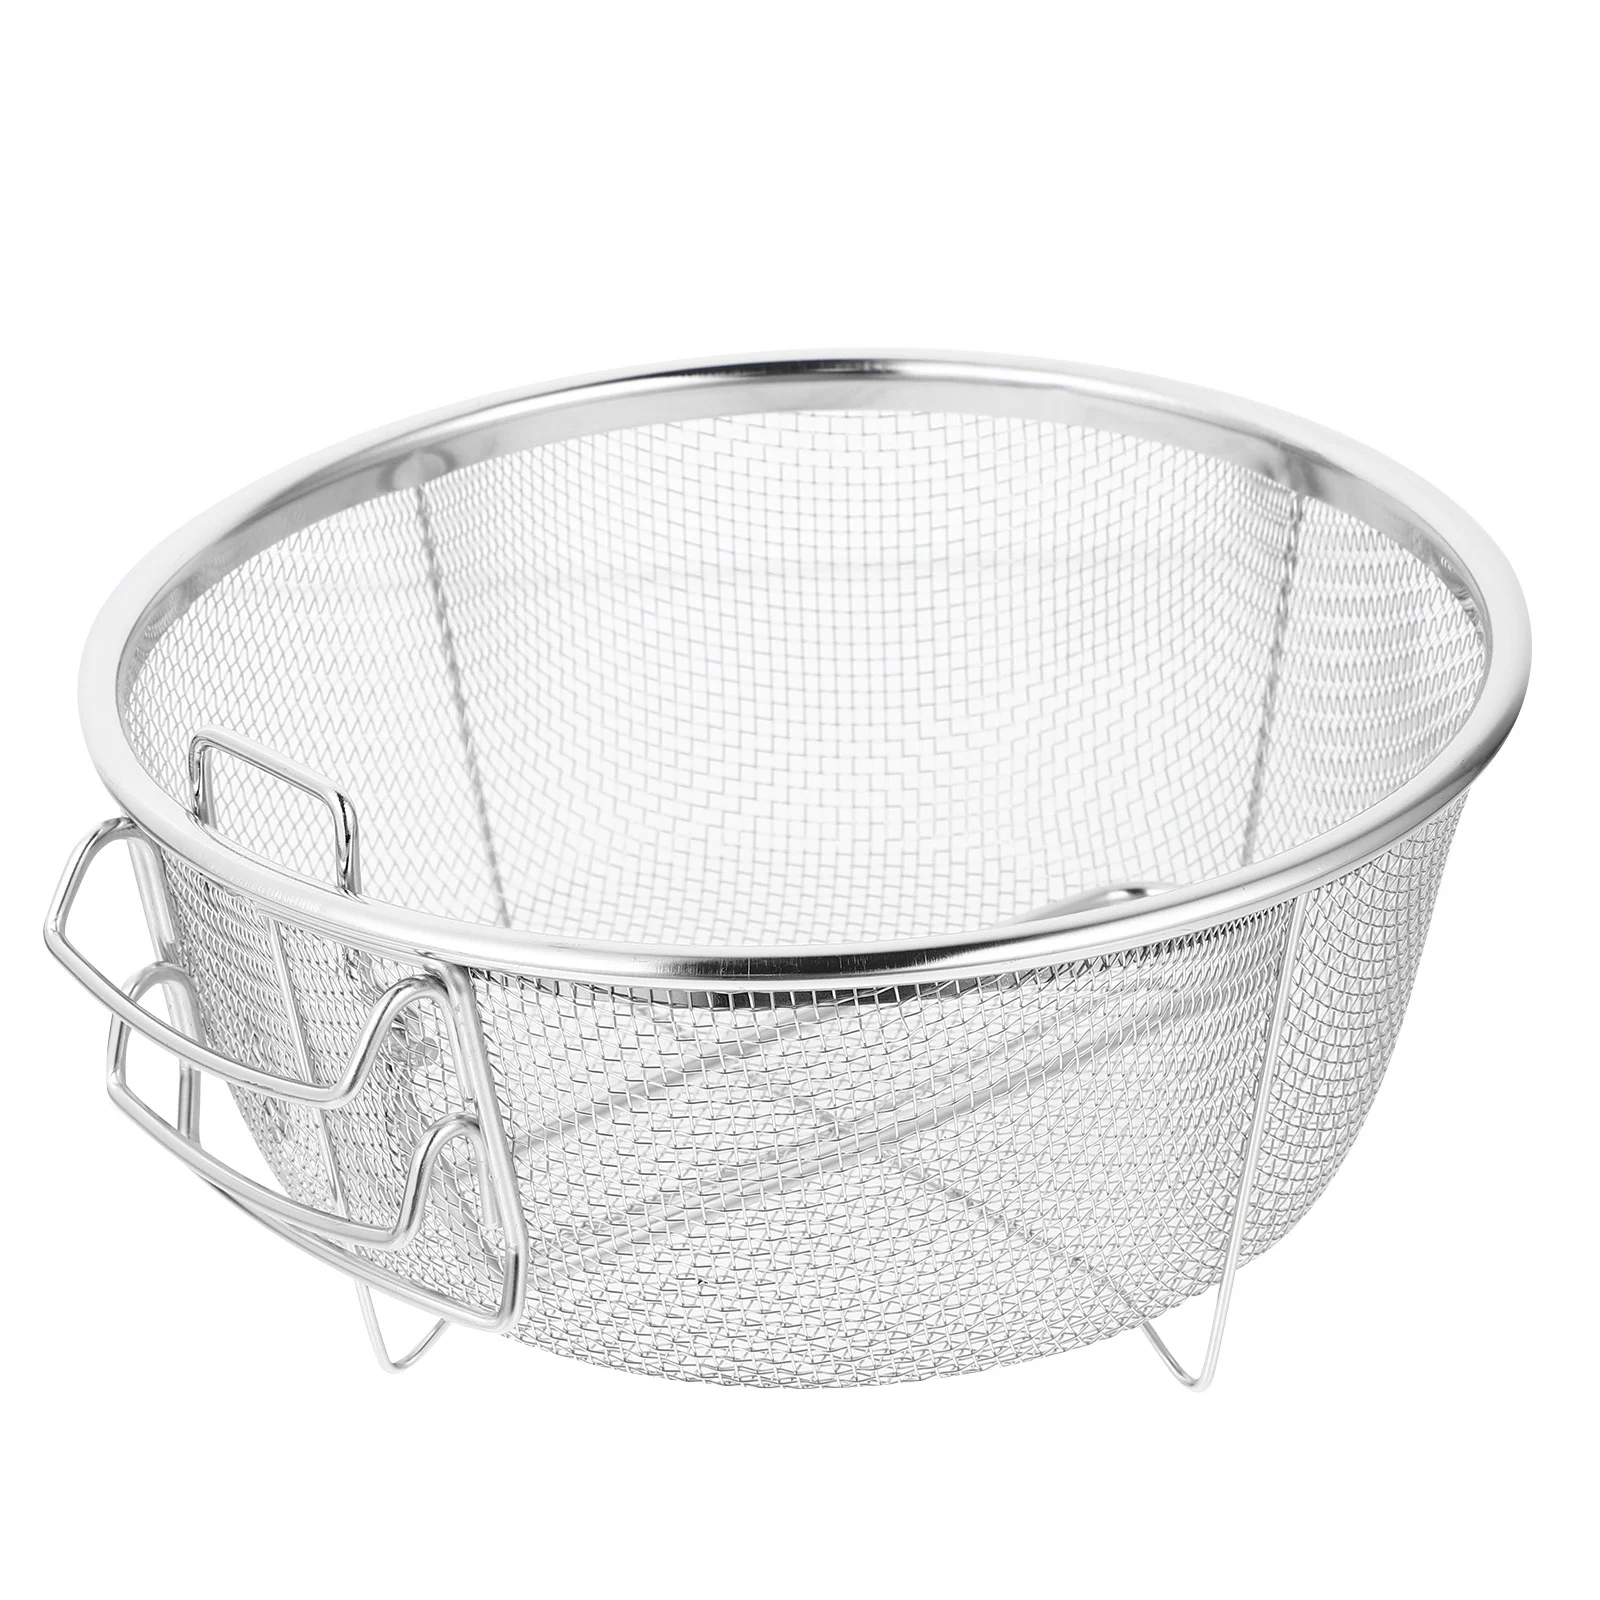 

Basket Fry Frying Strainer Fryer French Baskets Deep Mesh Skimmer Wire Fries Handle Steel Stainless Colander Net Chips Serving